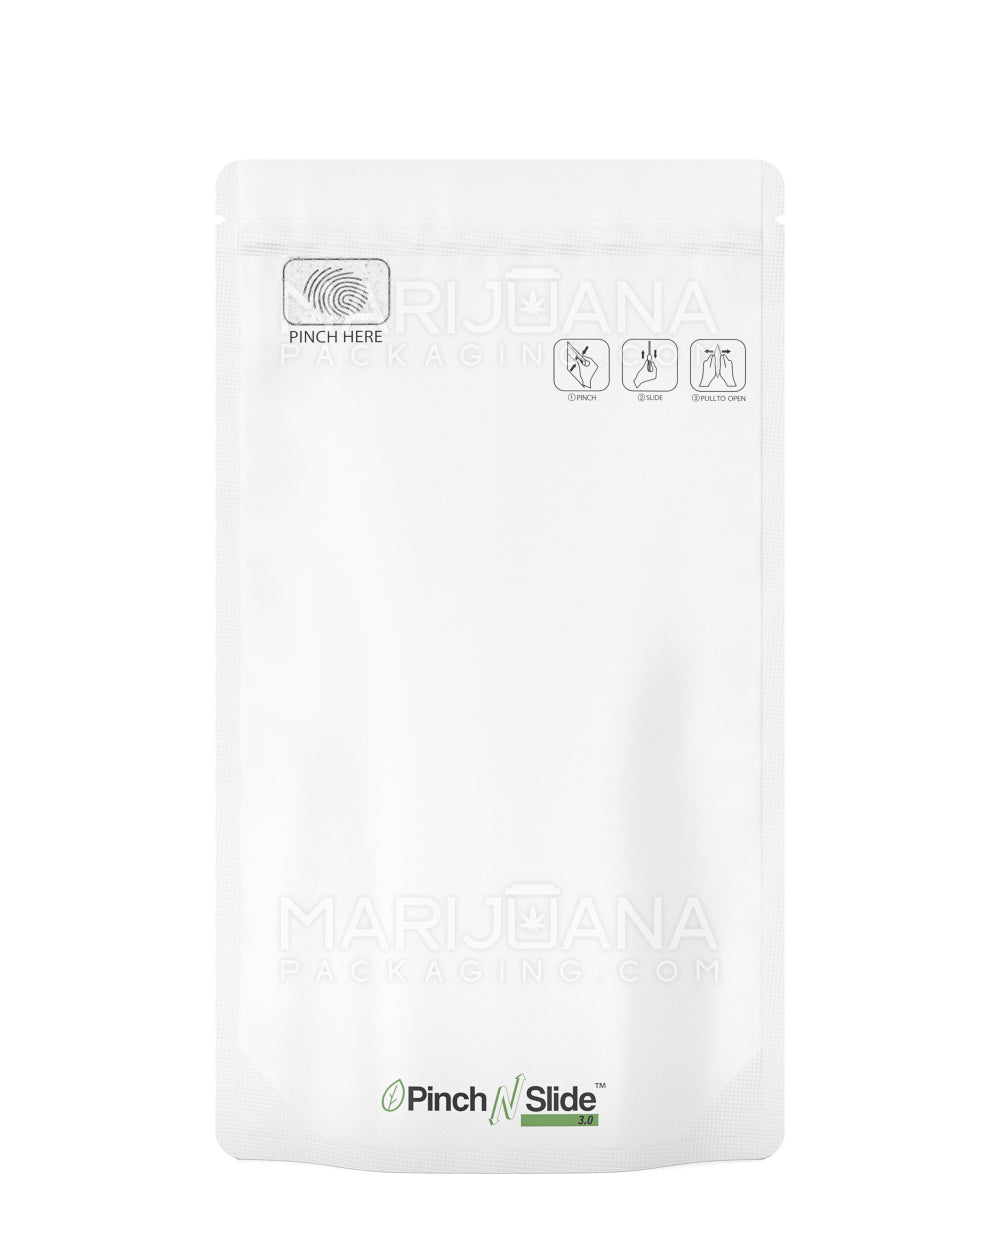 Child Resistant & Tamper Evident | Pinch N Slide 3.0 Matte White PCR Mylar Bags | 5in x 8.8in - 14g - 250 Count